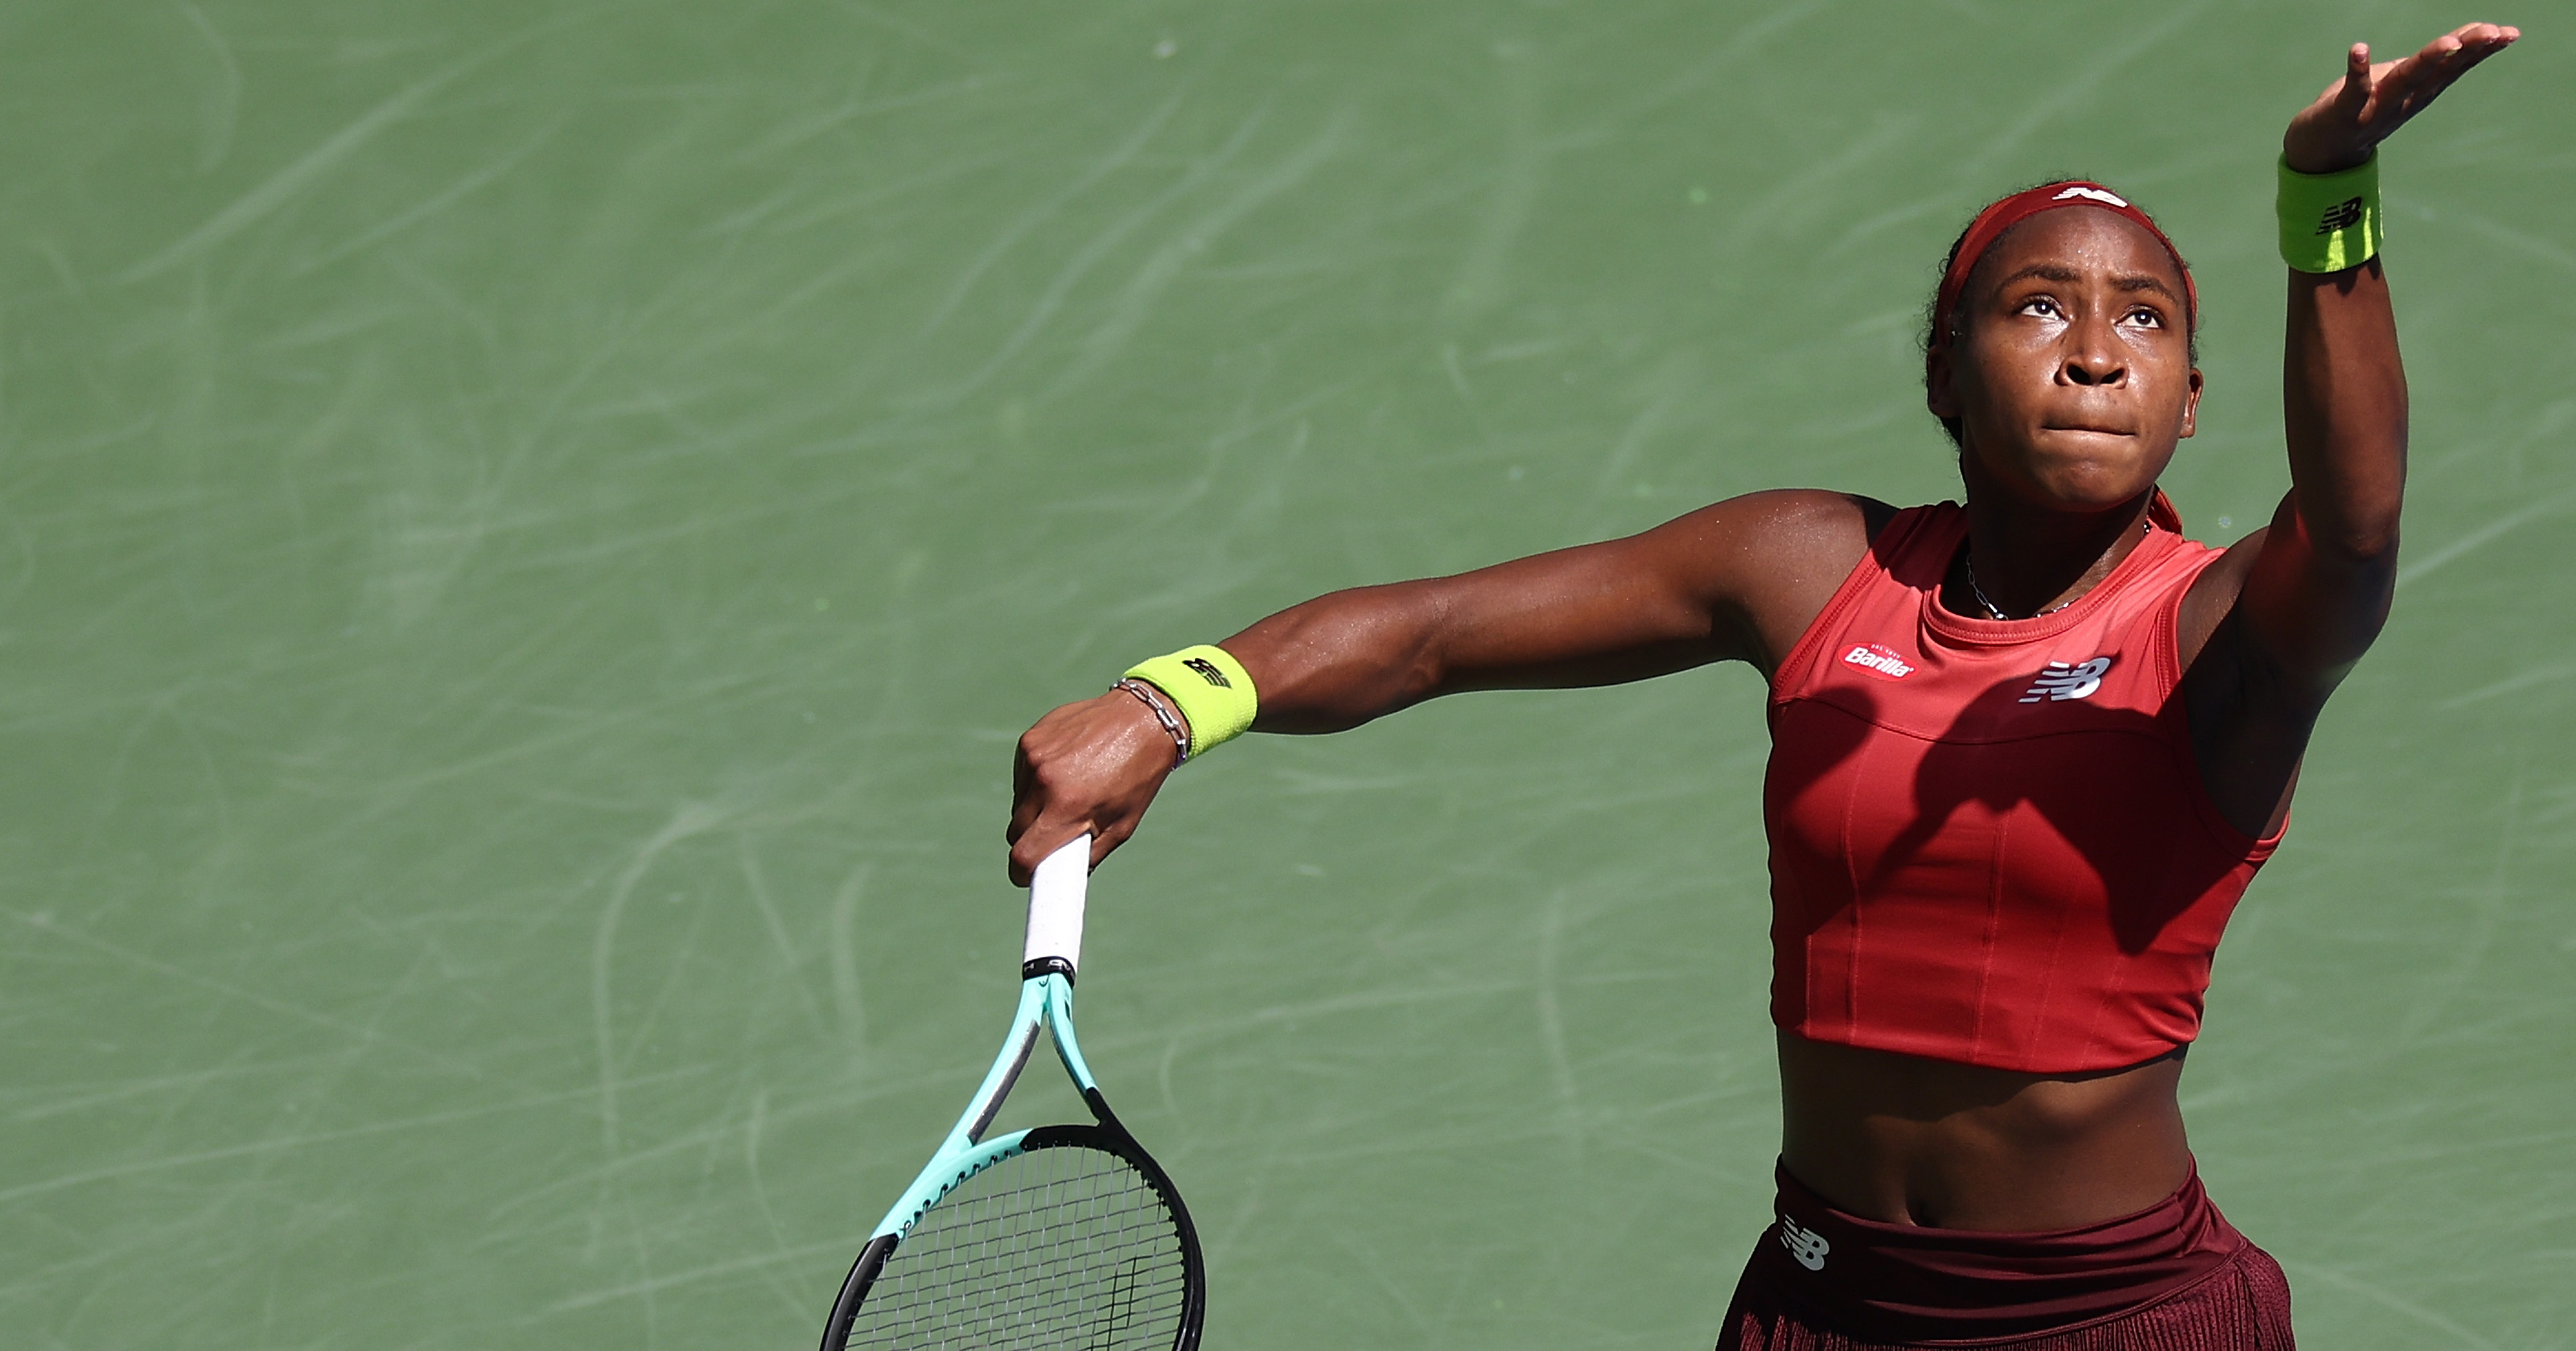 Coco Gauff dismisses out-of-sorts Jelena Ostapenko to reach first US Open semifinal